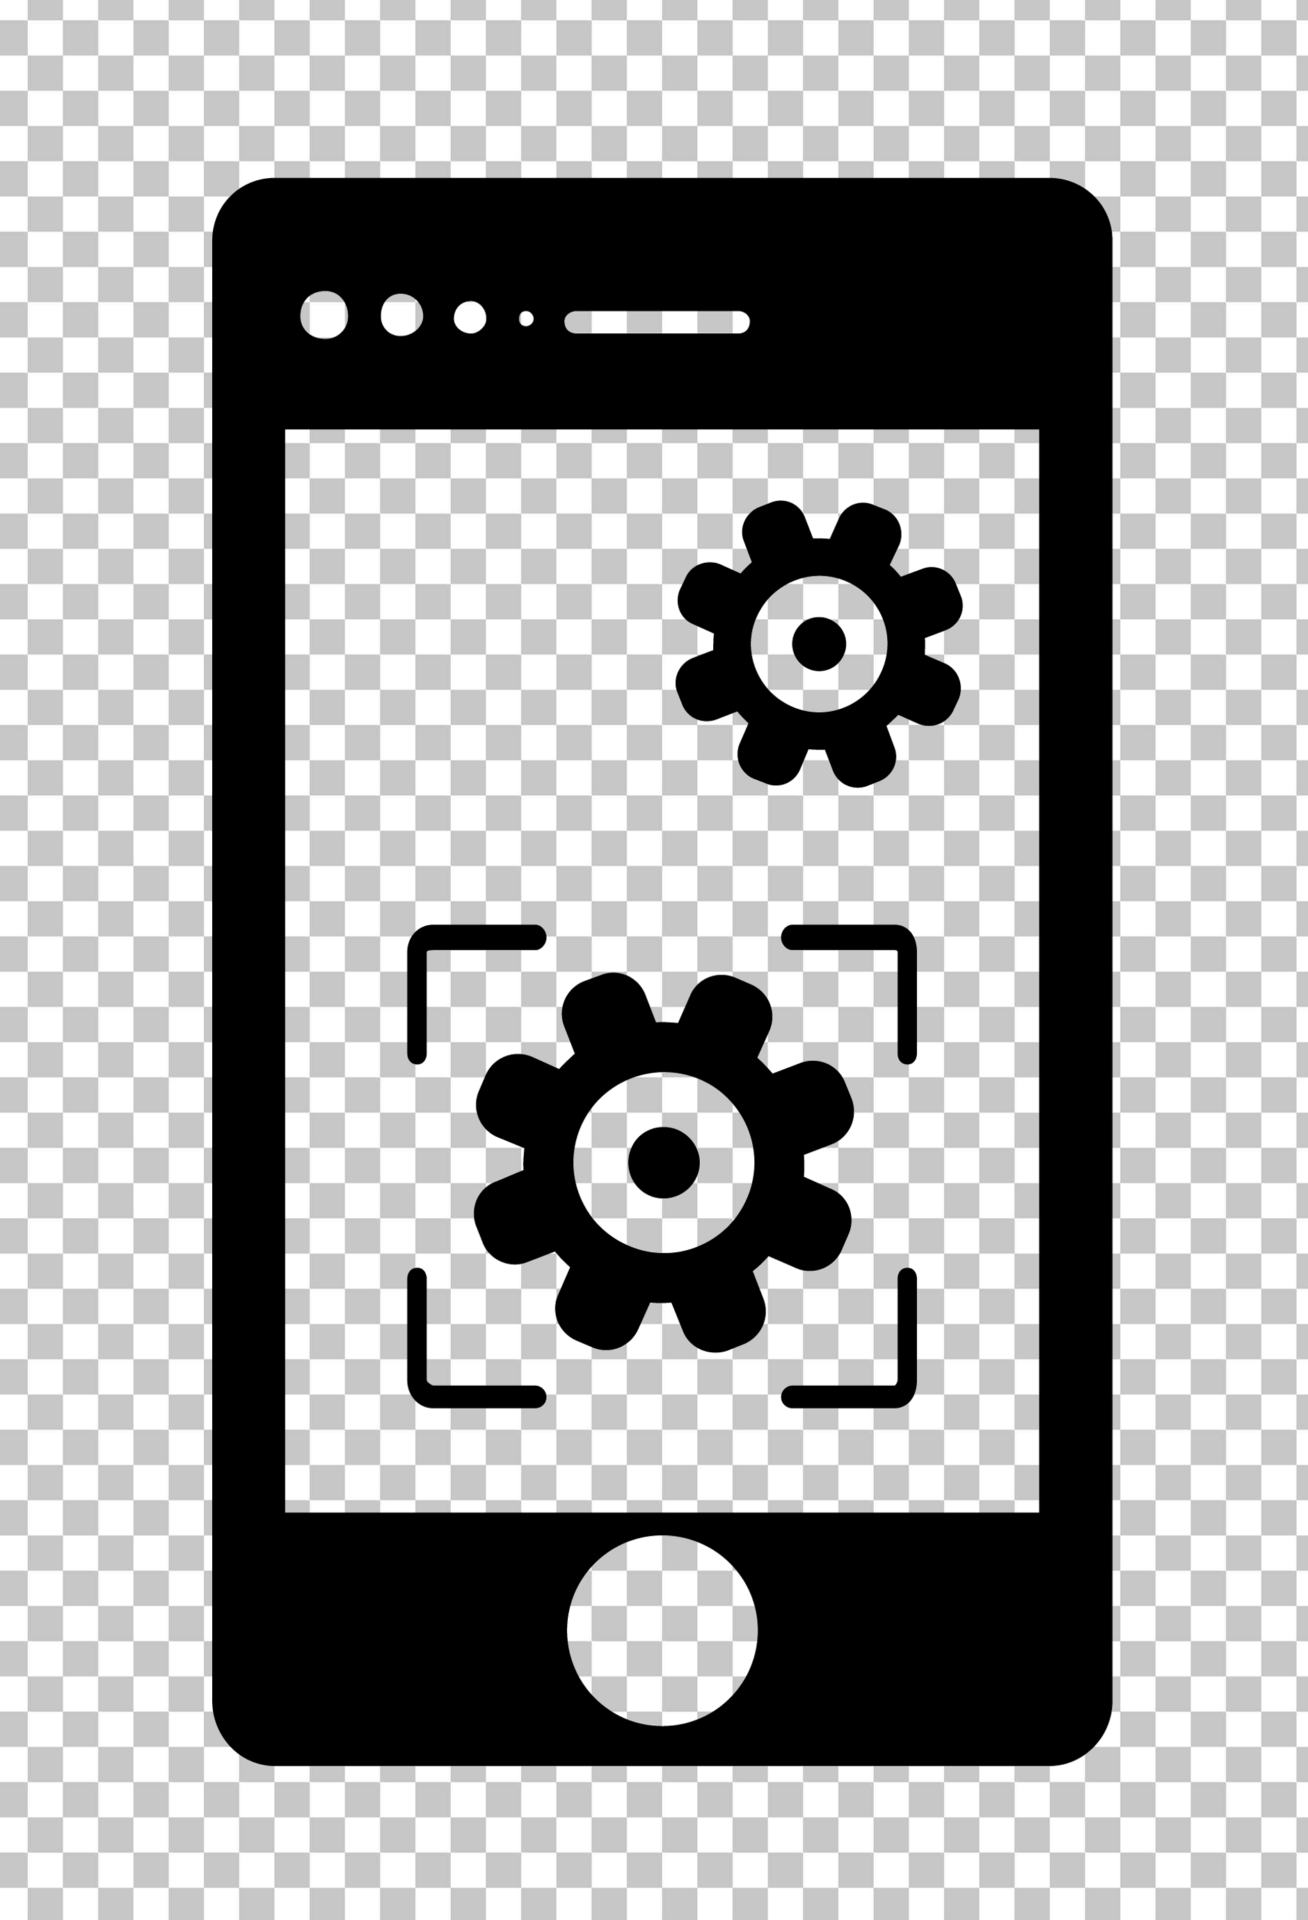 Cell Phone with Gears PNG Image